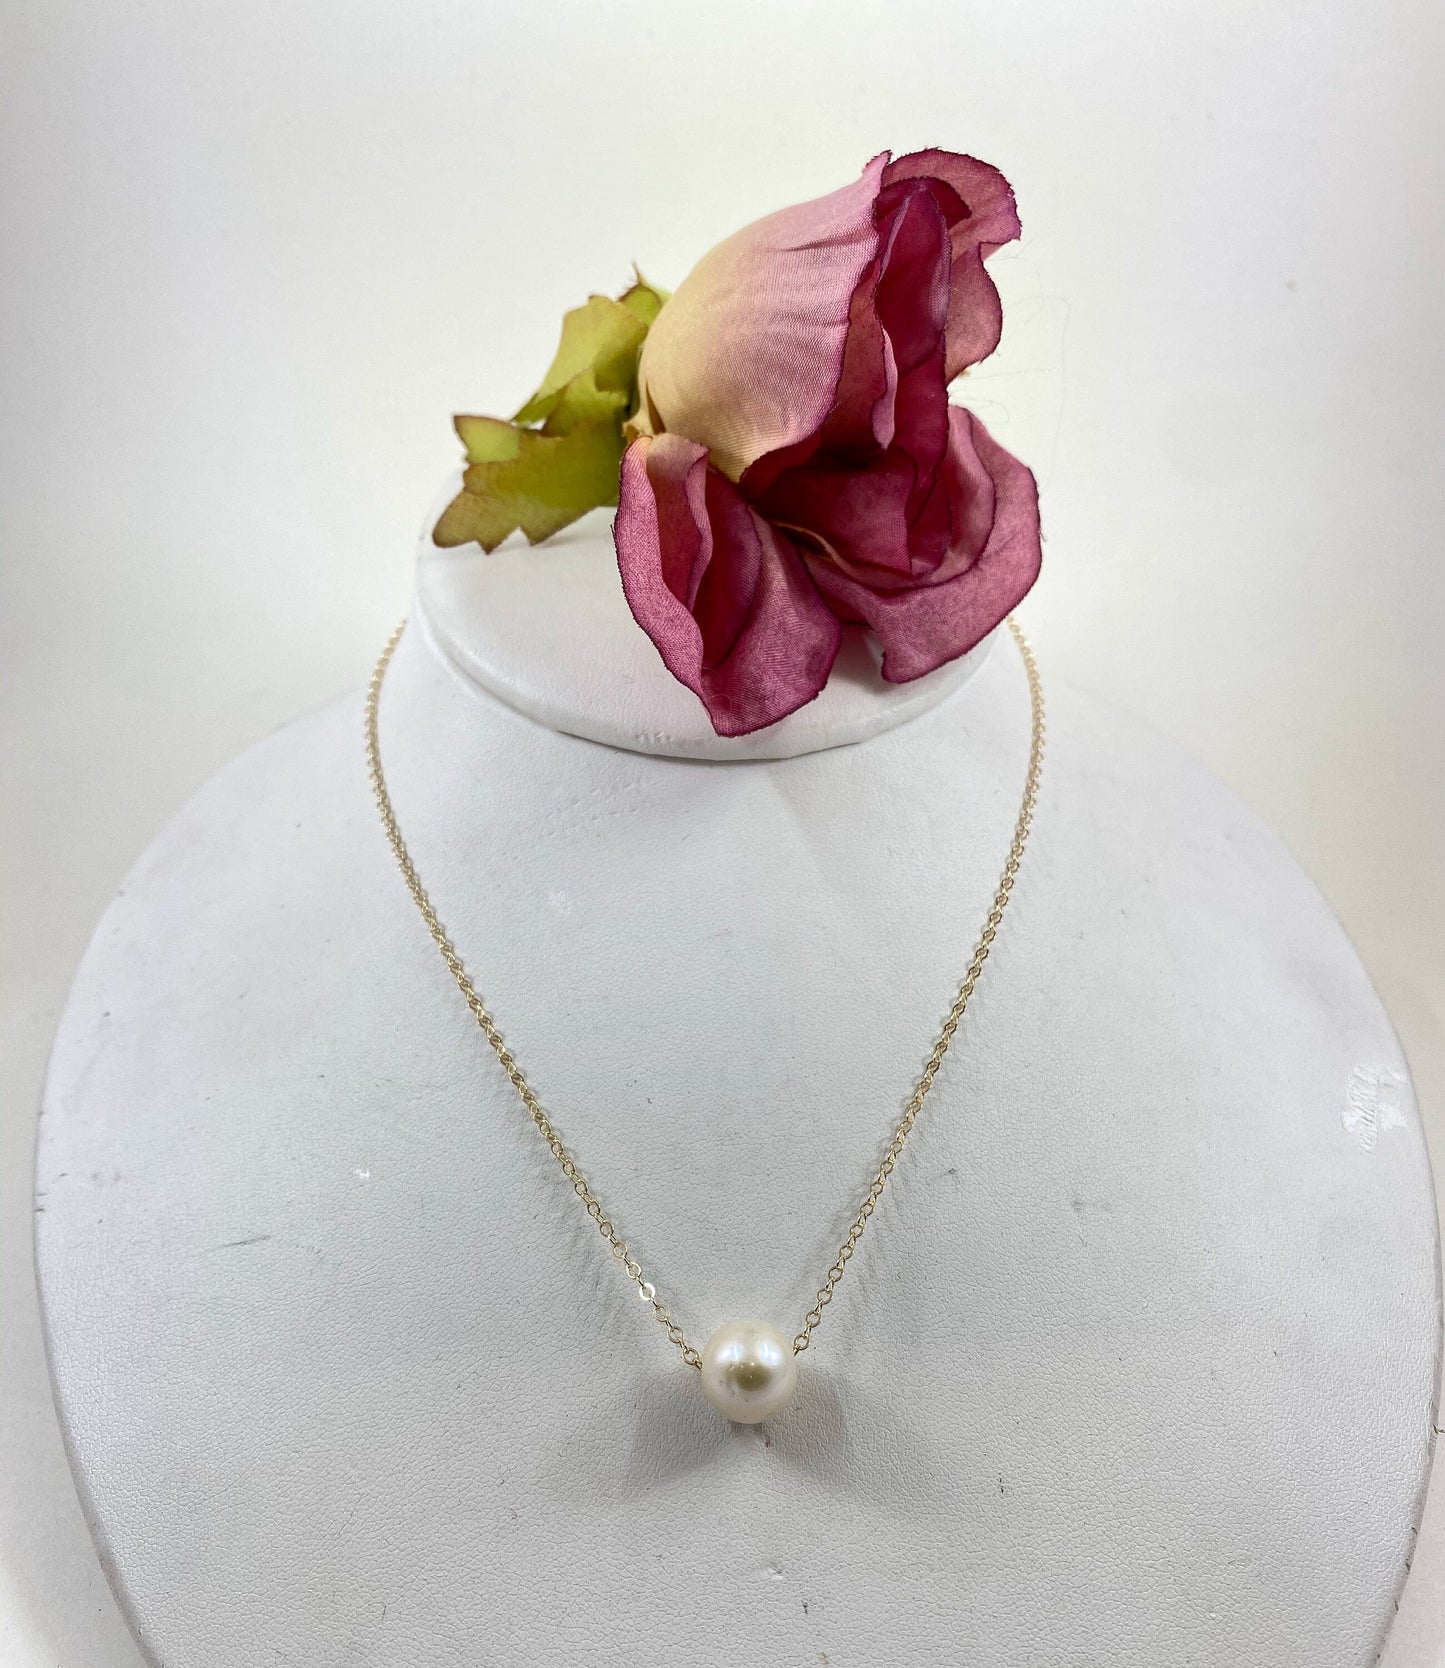 Pearl necklace. This single smooth white pearl slides freely on this lovely quality 14k gold filled chain.